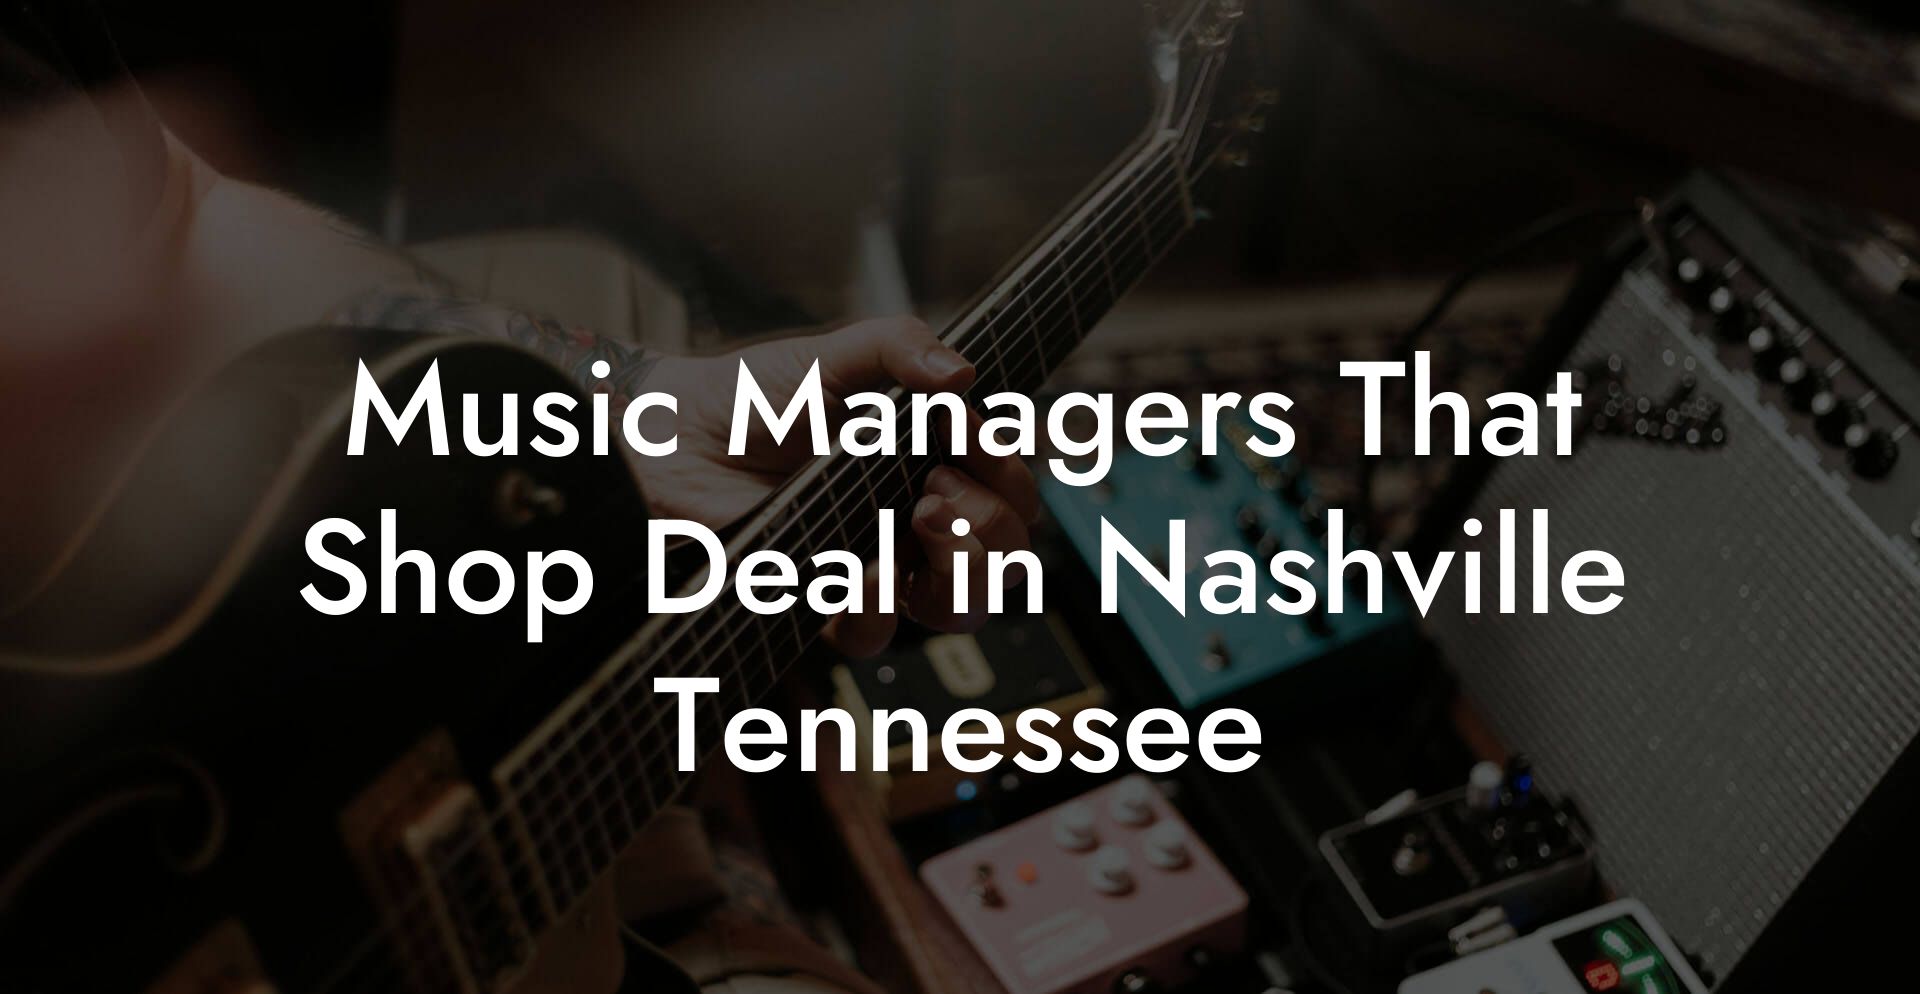 Music Managers That Shop Deal in Nashville Tennessee